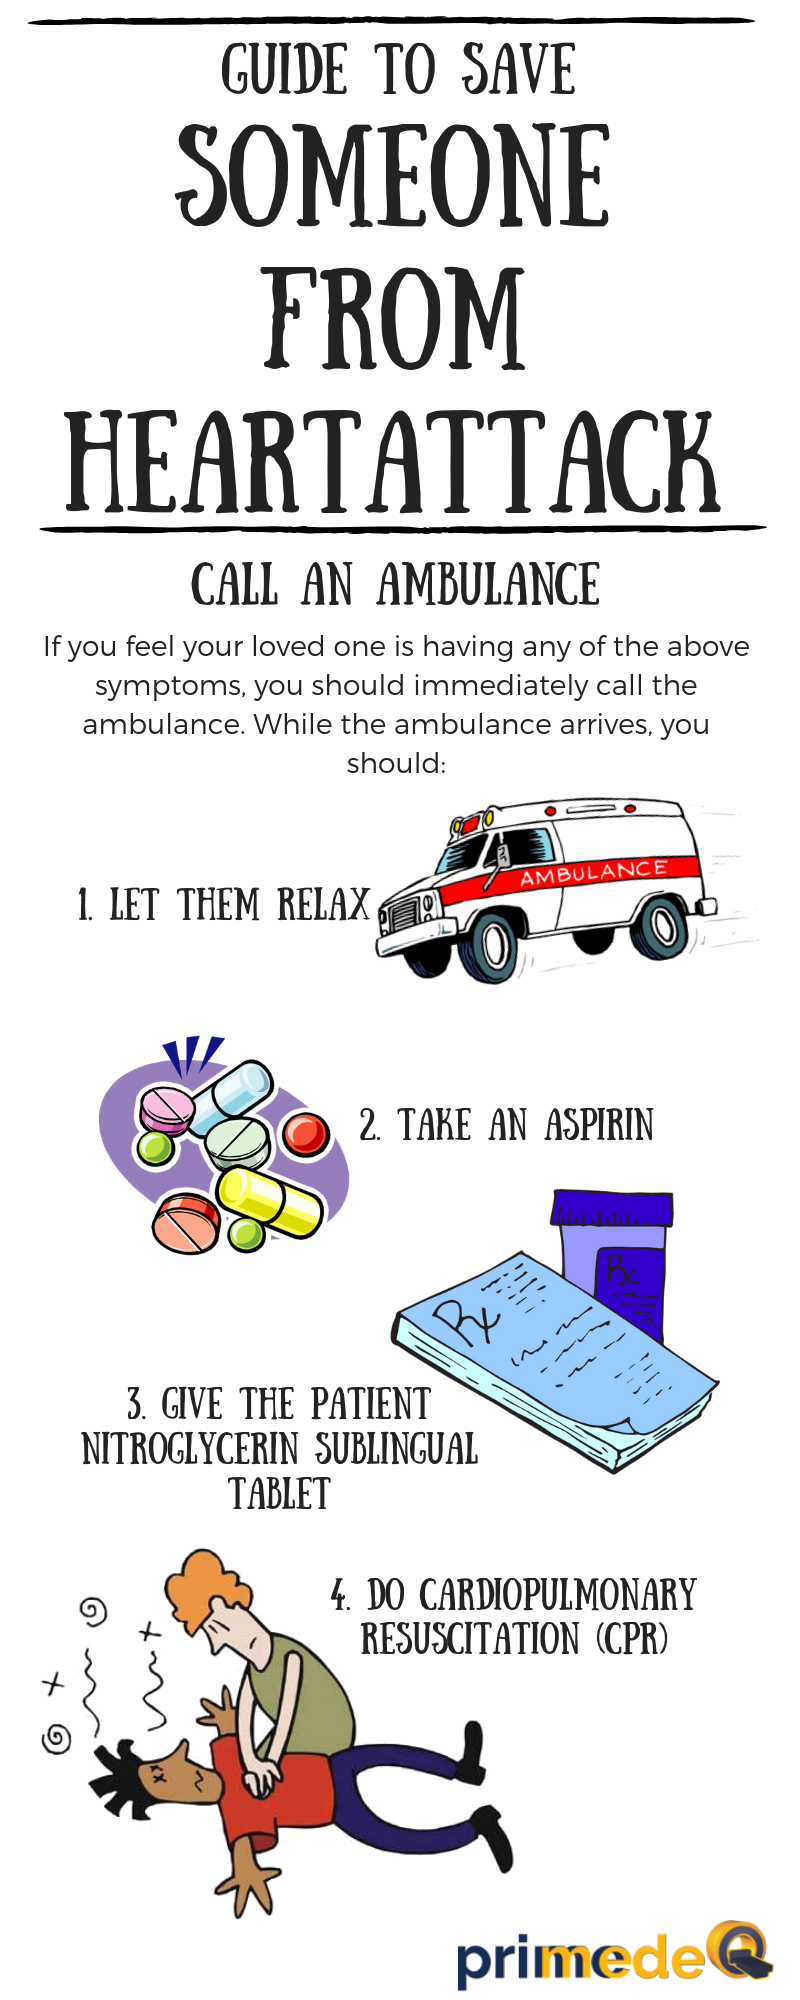 Infographic on what to do for heart attack patients